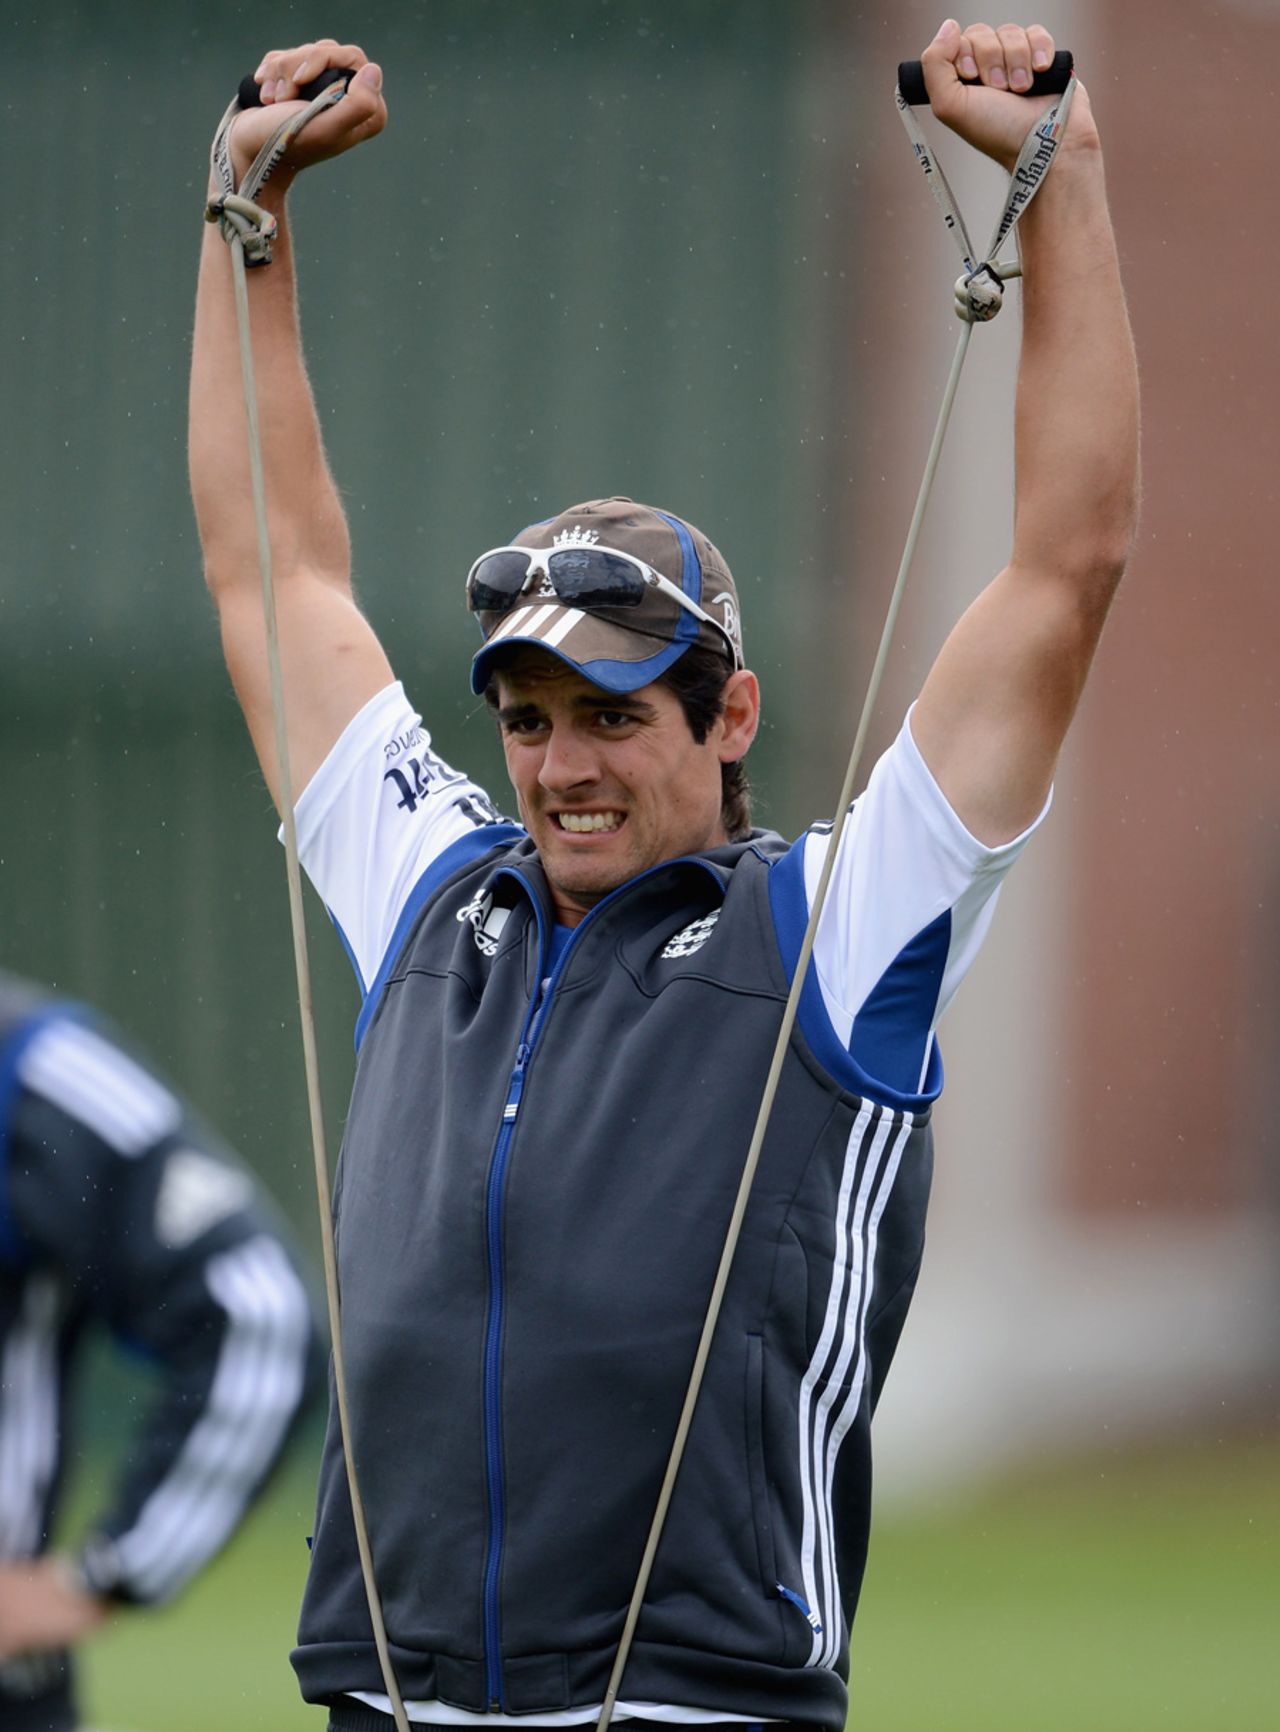 Alastair Cook is hard at work during training, Dunedin, March 4, 2013